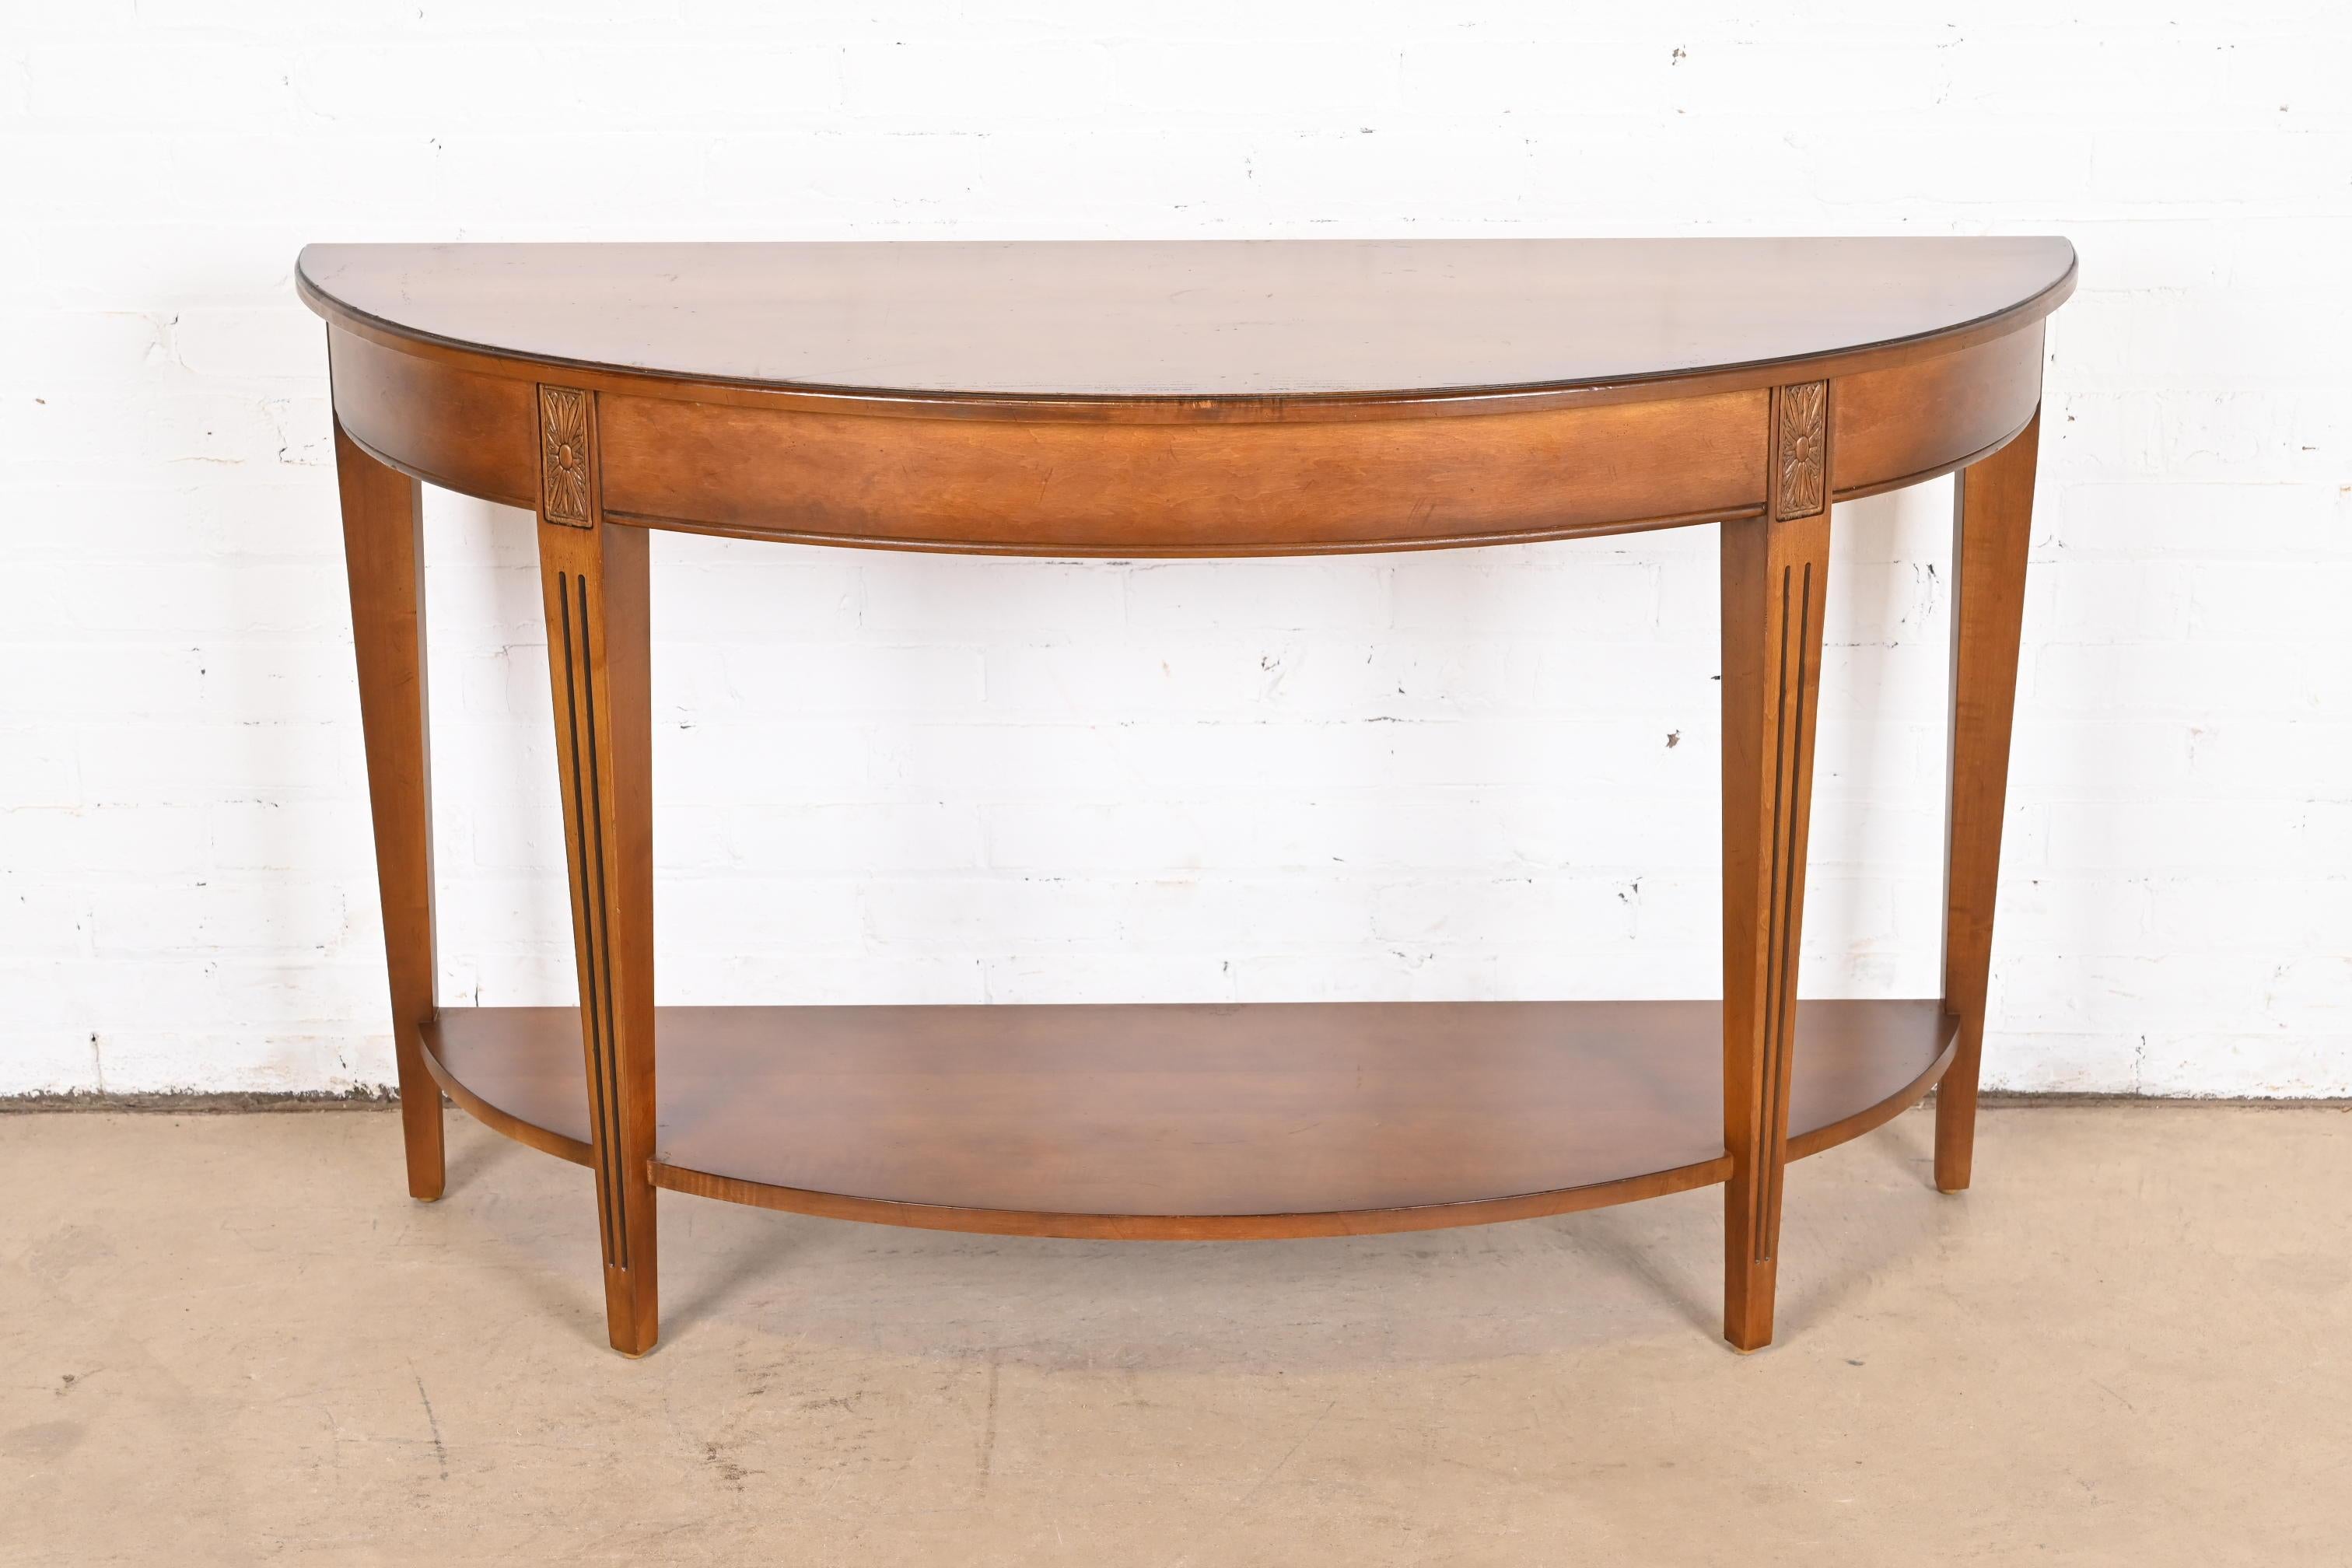 French Country Maple Demilune Console Table or Sofa Table In Good Condition For Sale In South Bend, IN